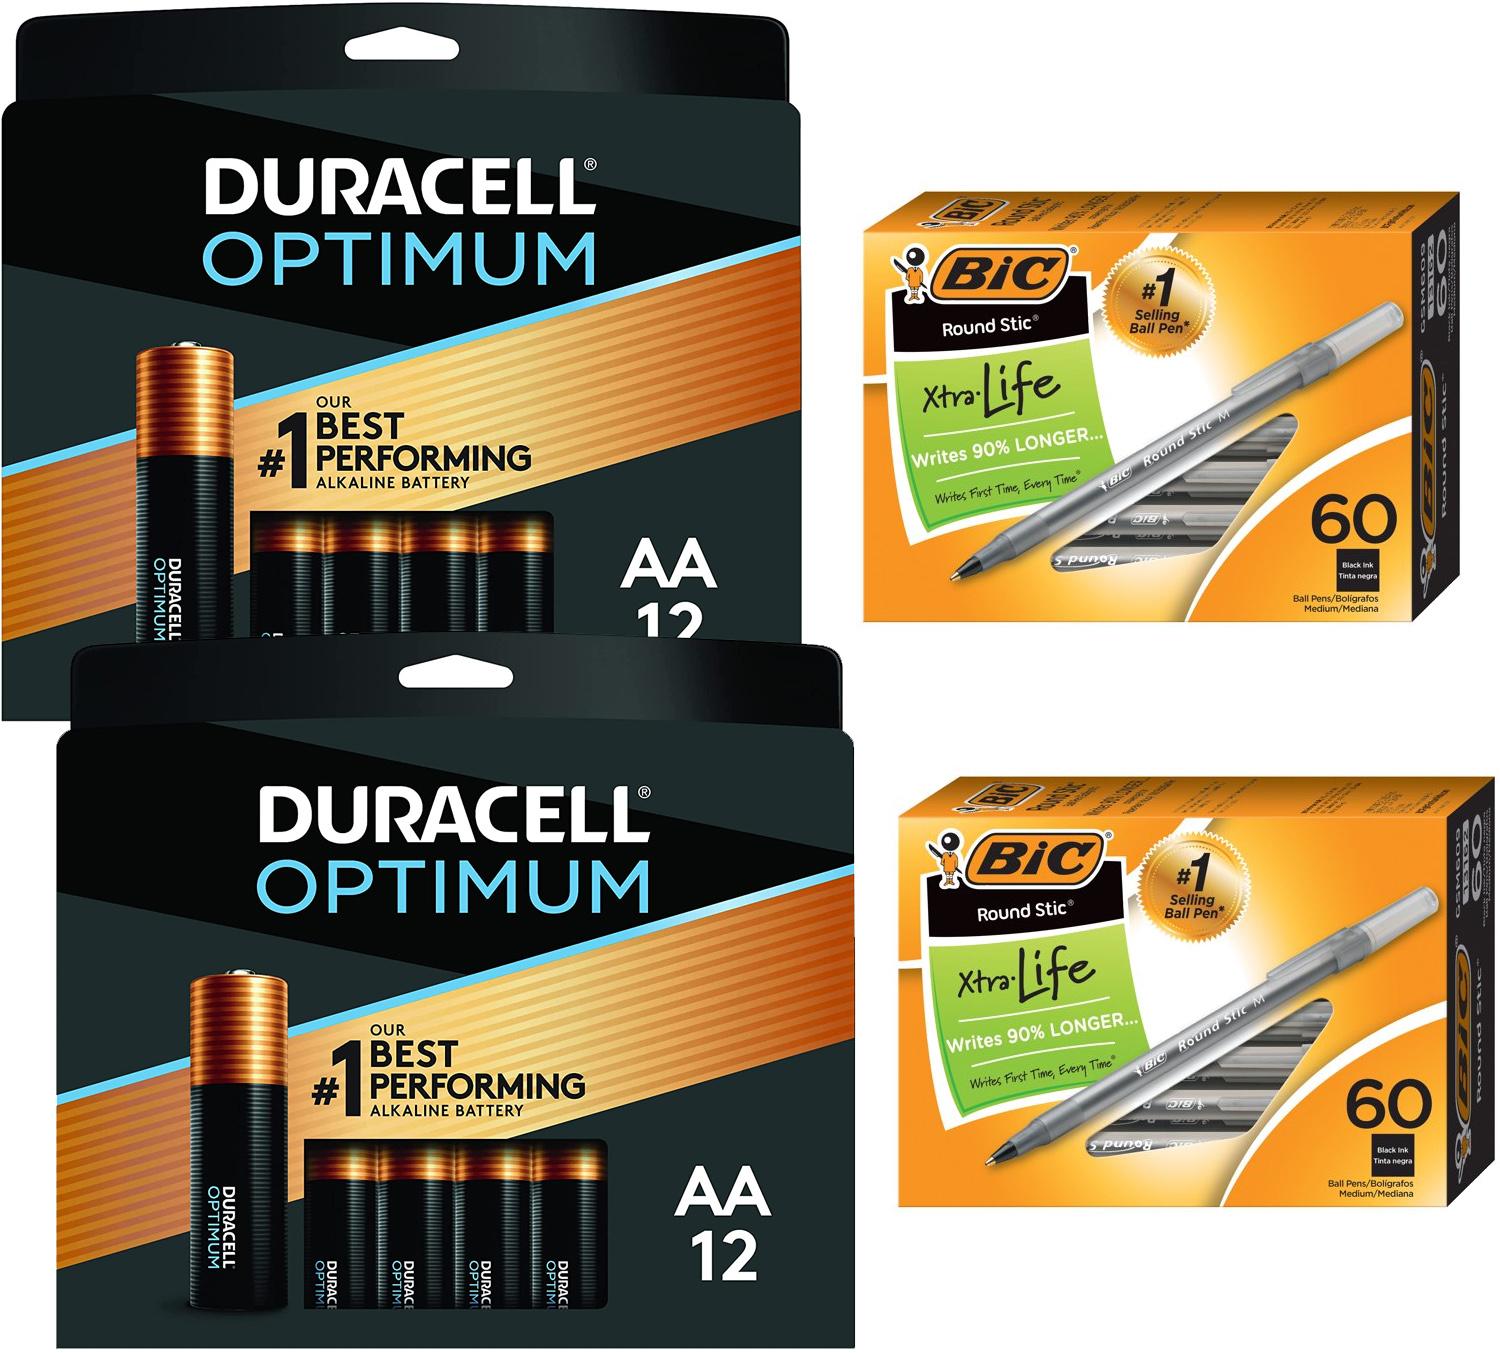 Free 36 Duracell Optimum AA or AAA Battery + 120 BIC Pens